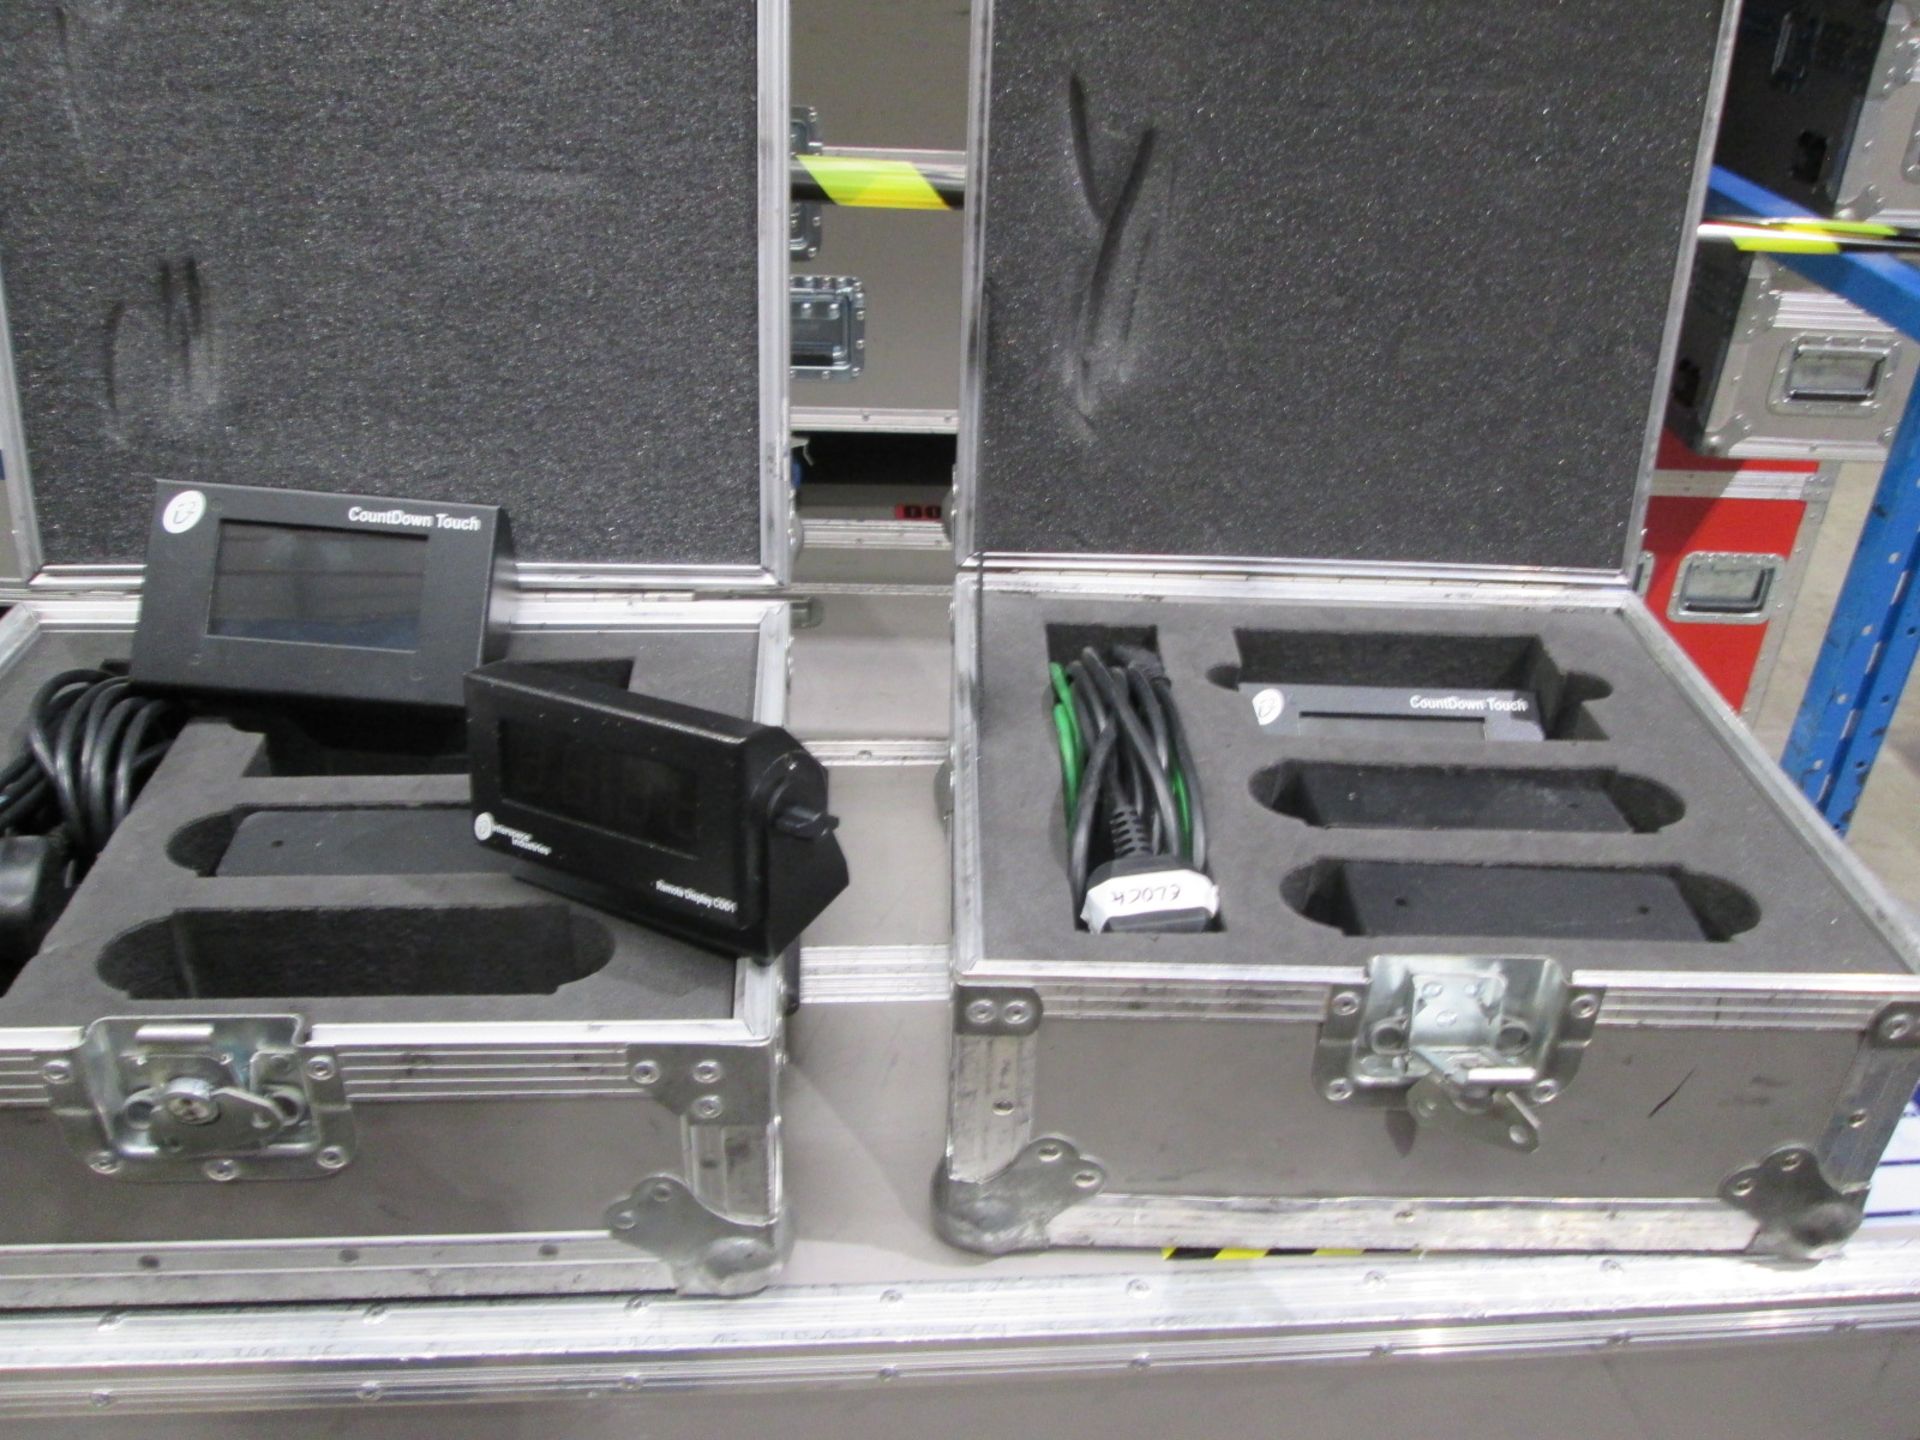 Interspace Industries Countdown Touch with 2 x CDD1 remote Displays, In flight case (Qty 7) - Image 3 of 5